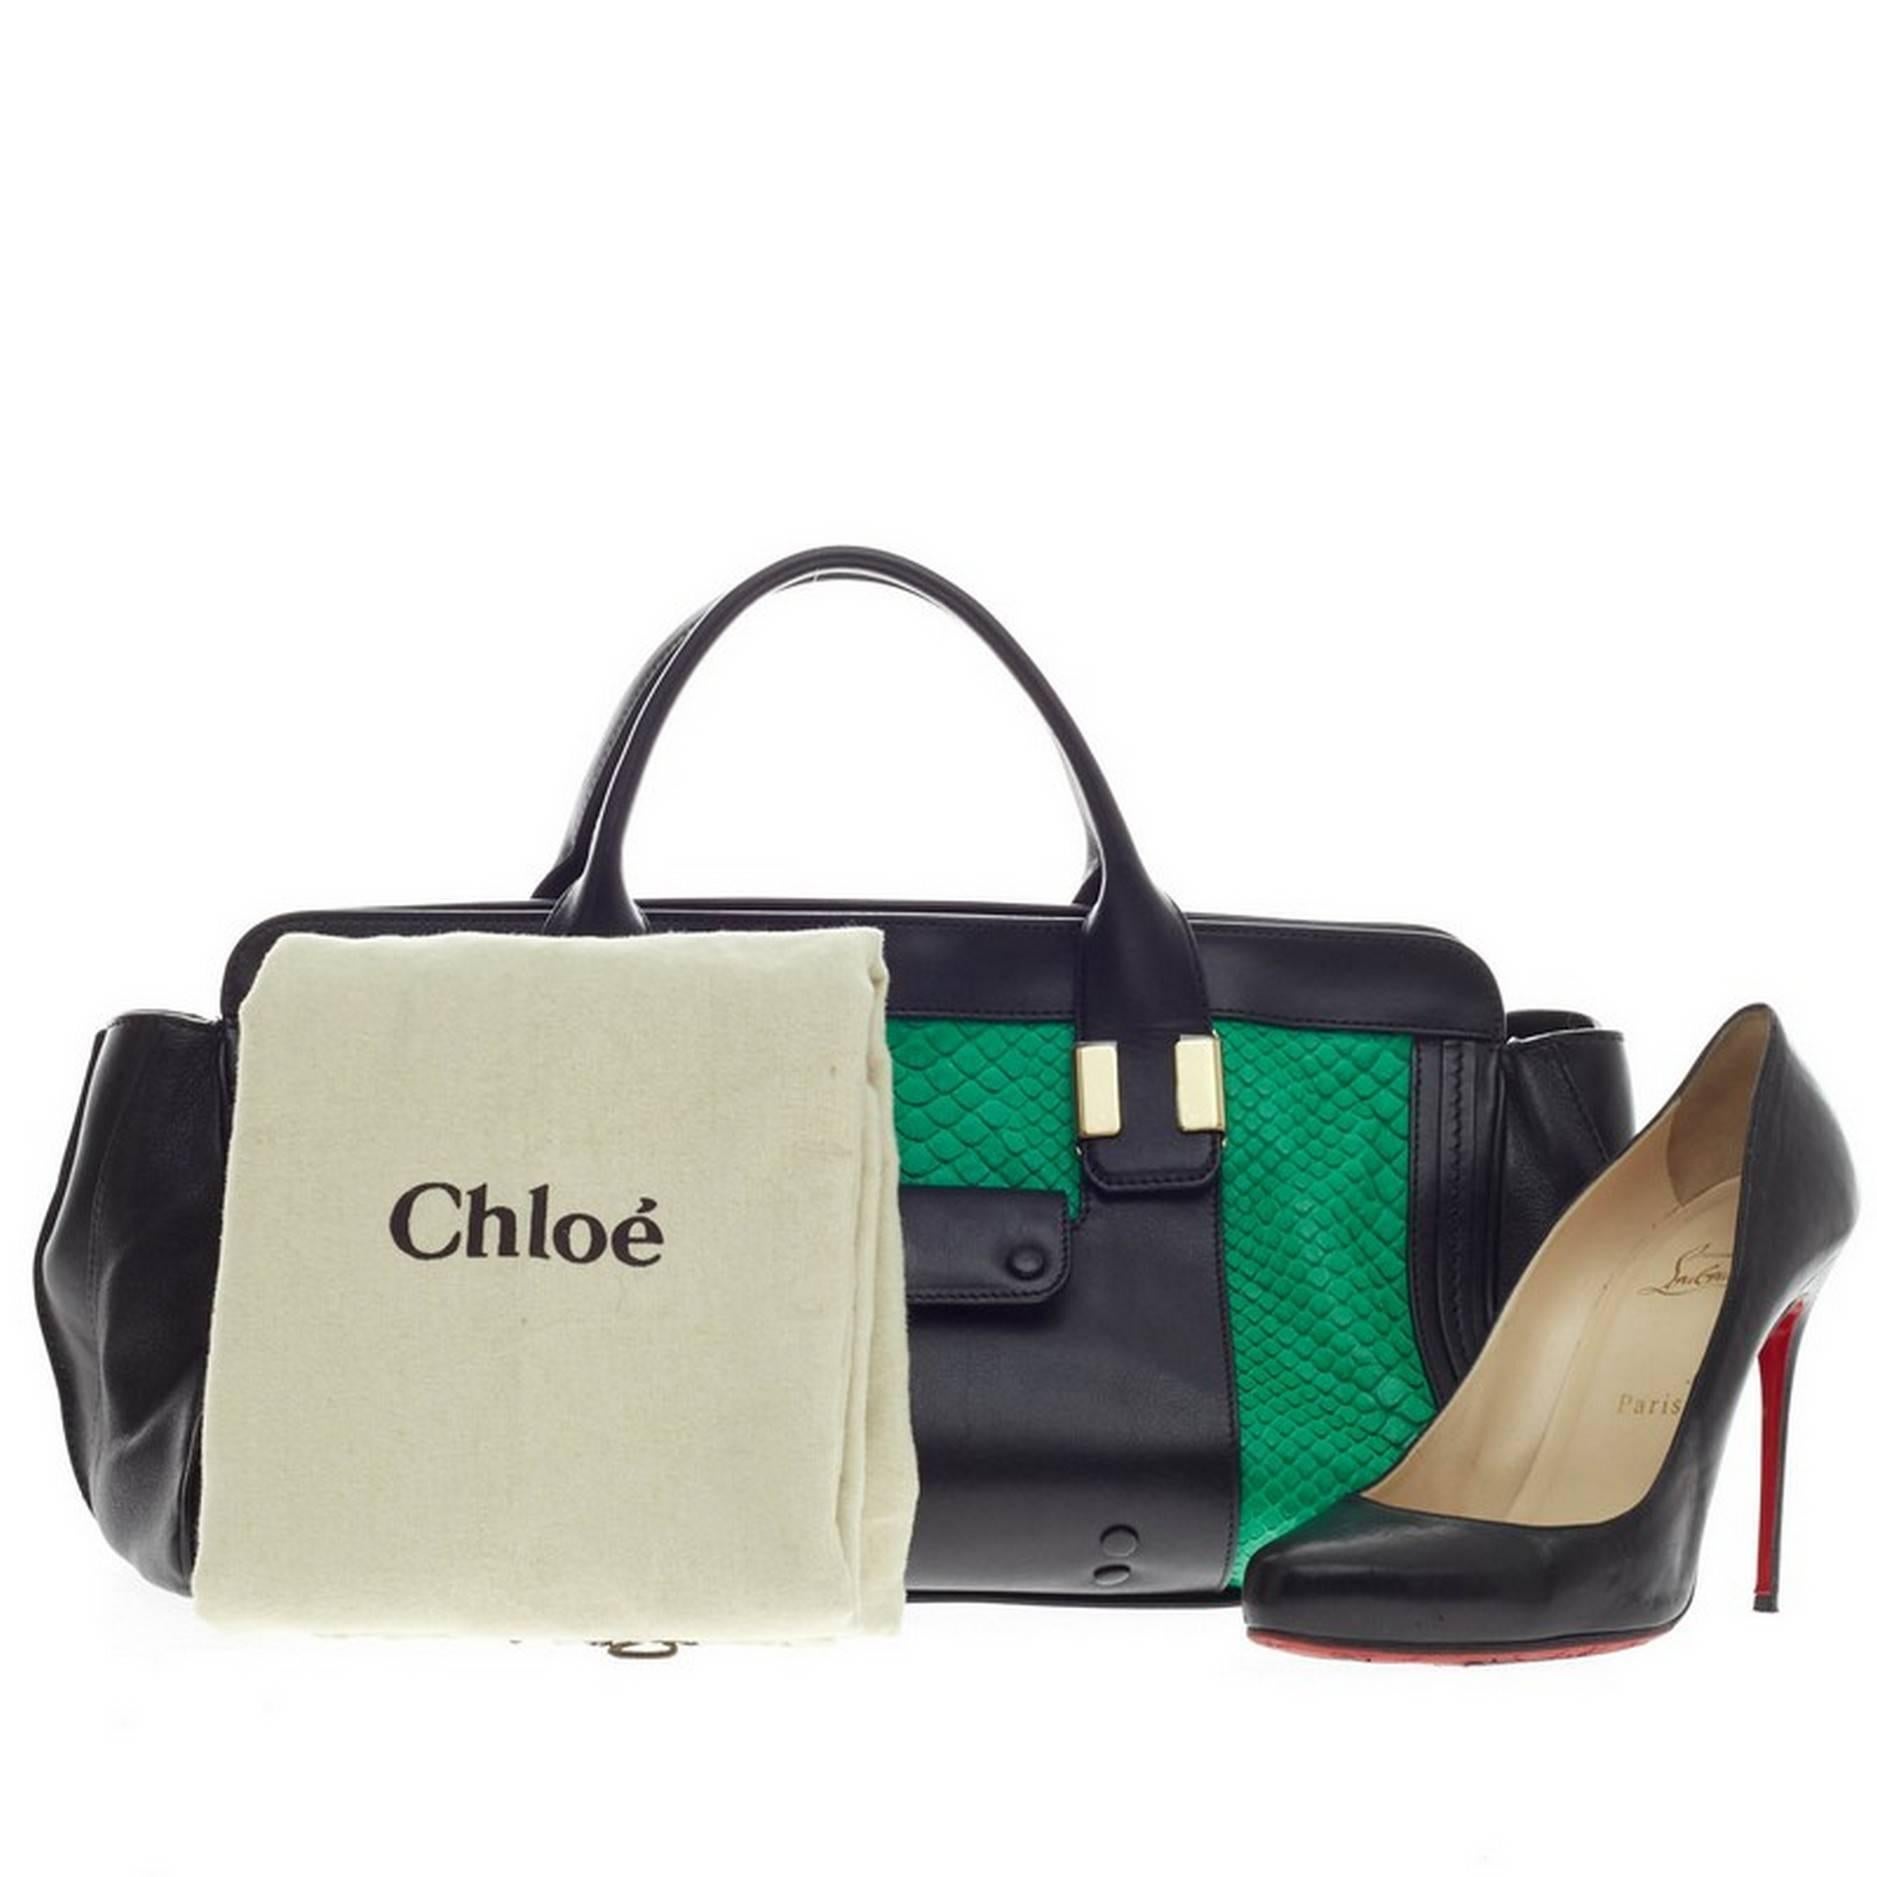 This authentic Chloe Alice Satchel Python Large is an eye-catching piece ideal for day to evening look. Crafted in soft black leather with genuine vivid green and black python skin, this no-fuss, luxurious satchel features dual-rolled handles, front